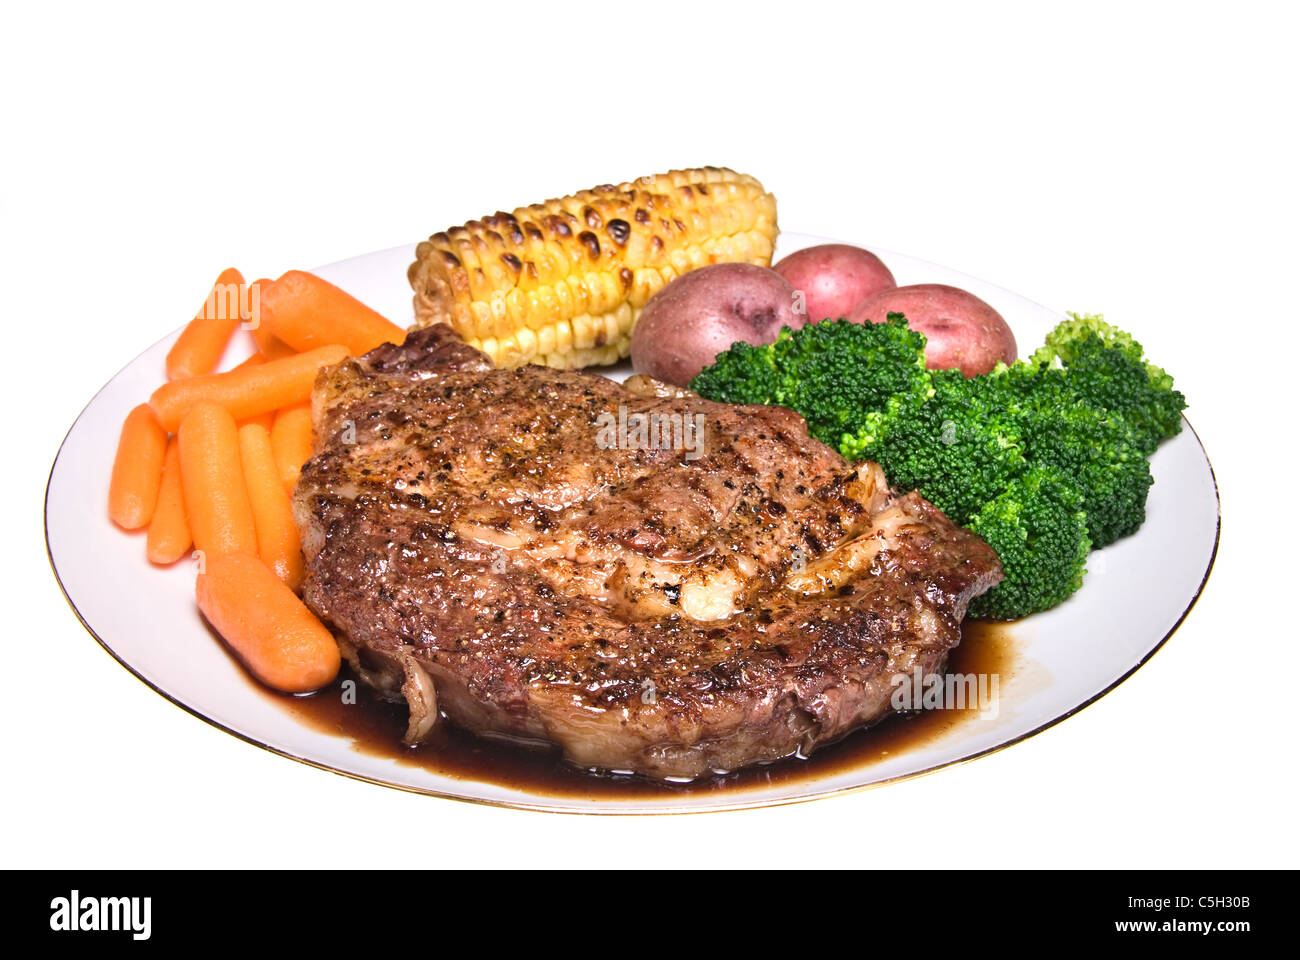 A delicious steak dinner consisting of a fillet, baby carrots, broccoli; baby potatoes and corn on the cob. Stock Photo